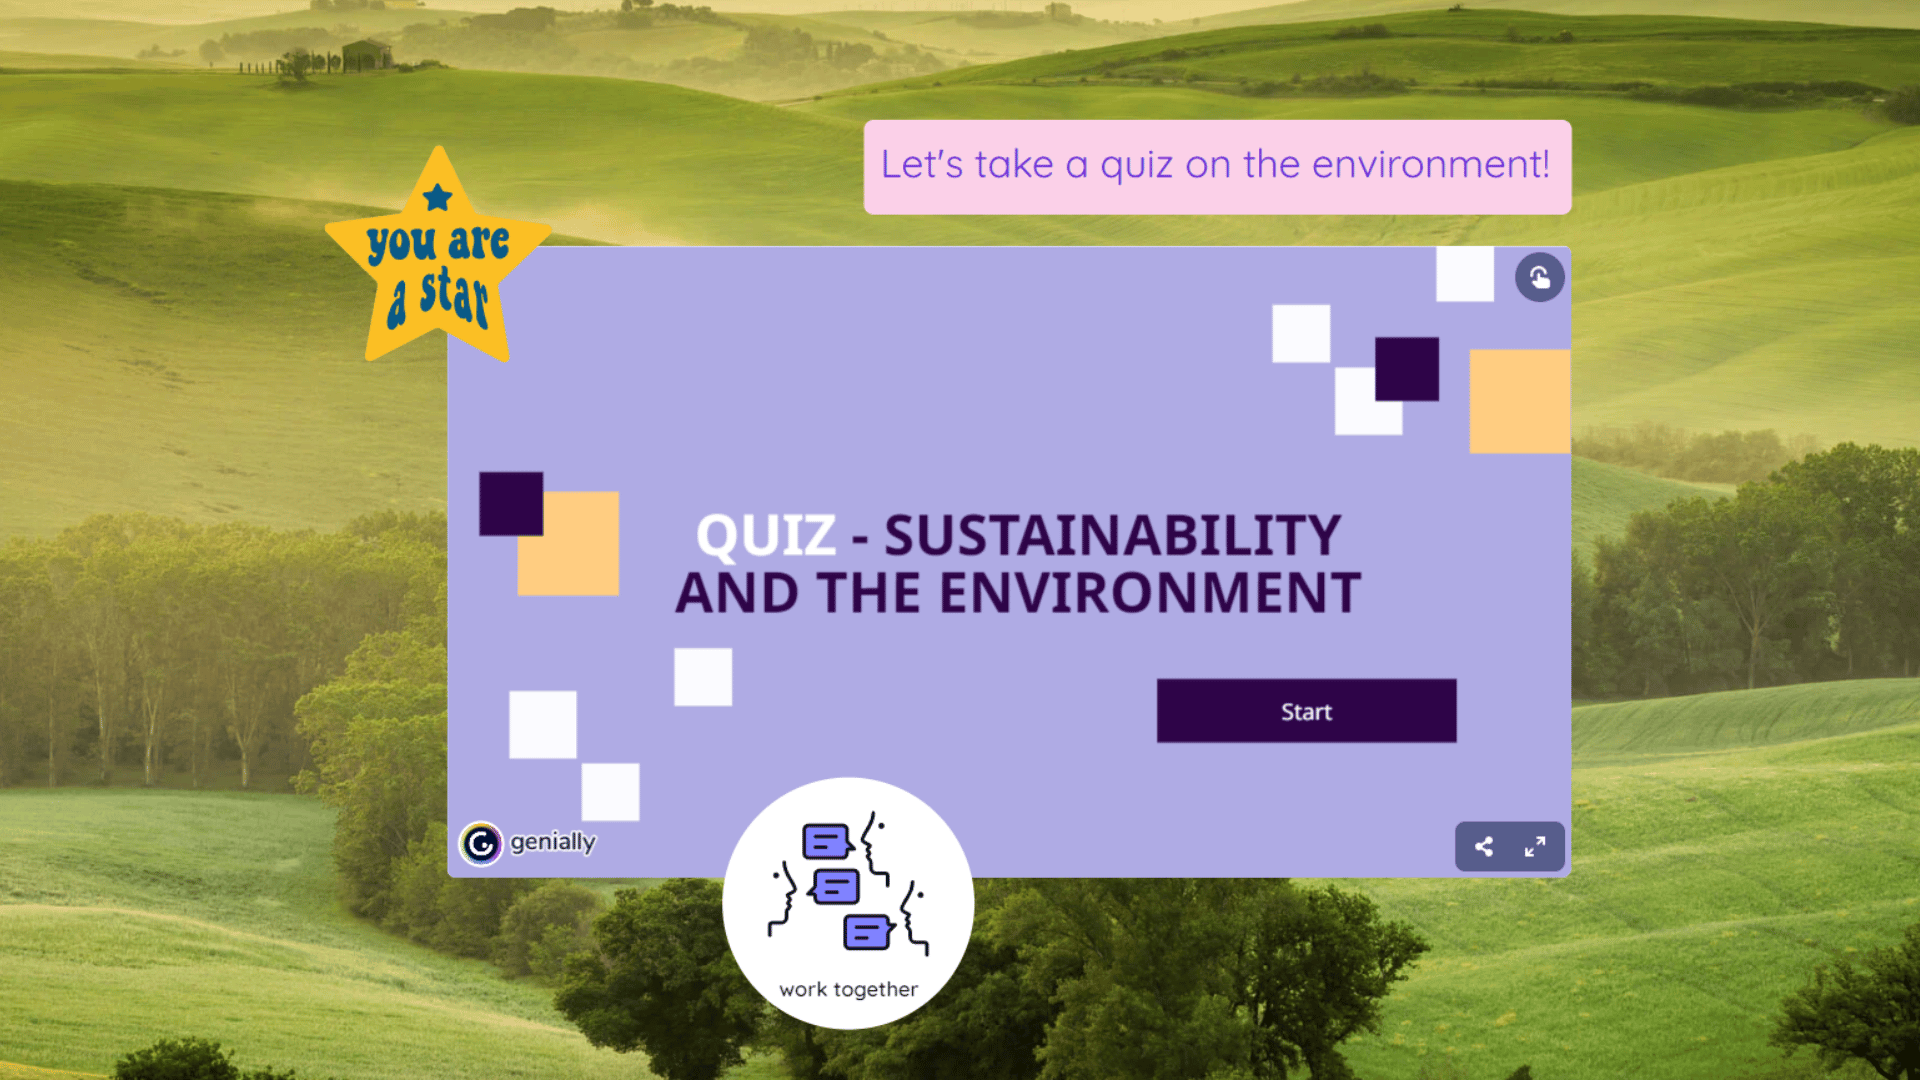 This visual shows a quiz on the environment from Genially with other widgets.